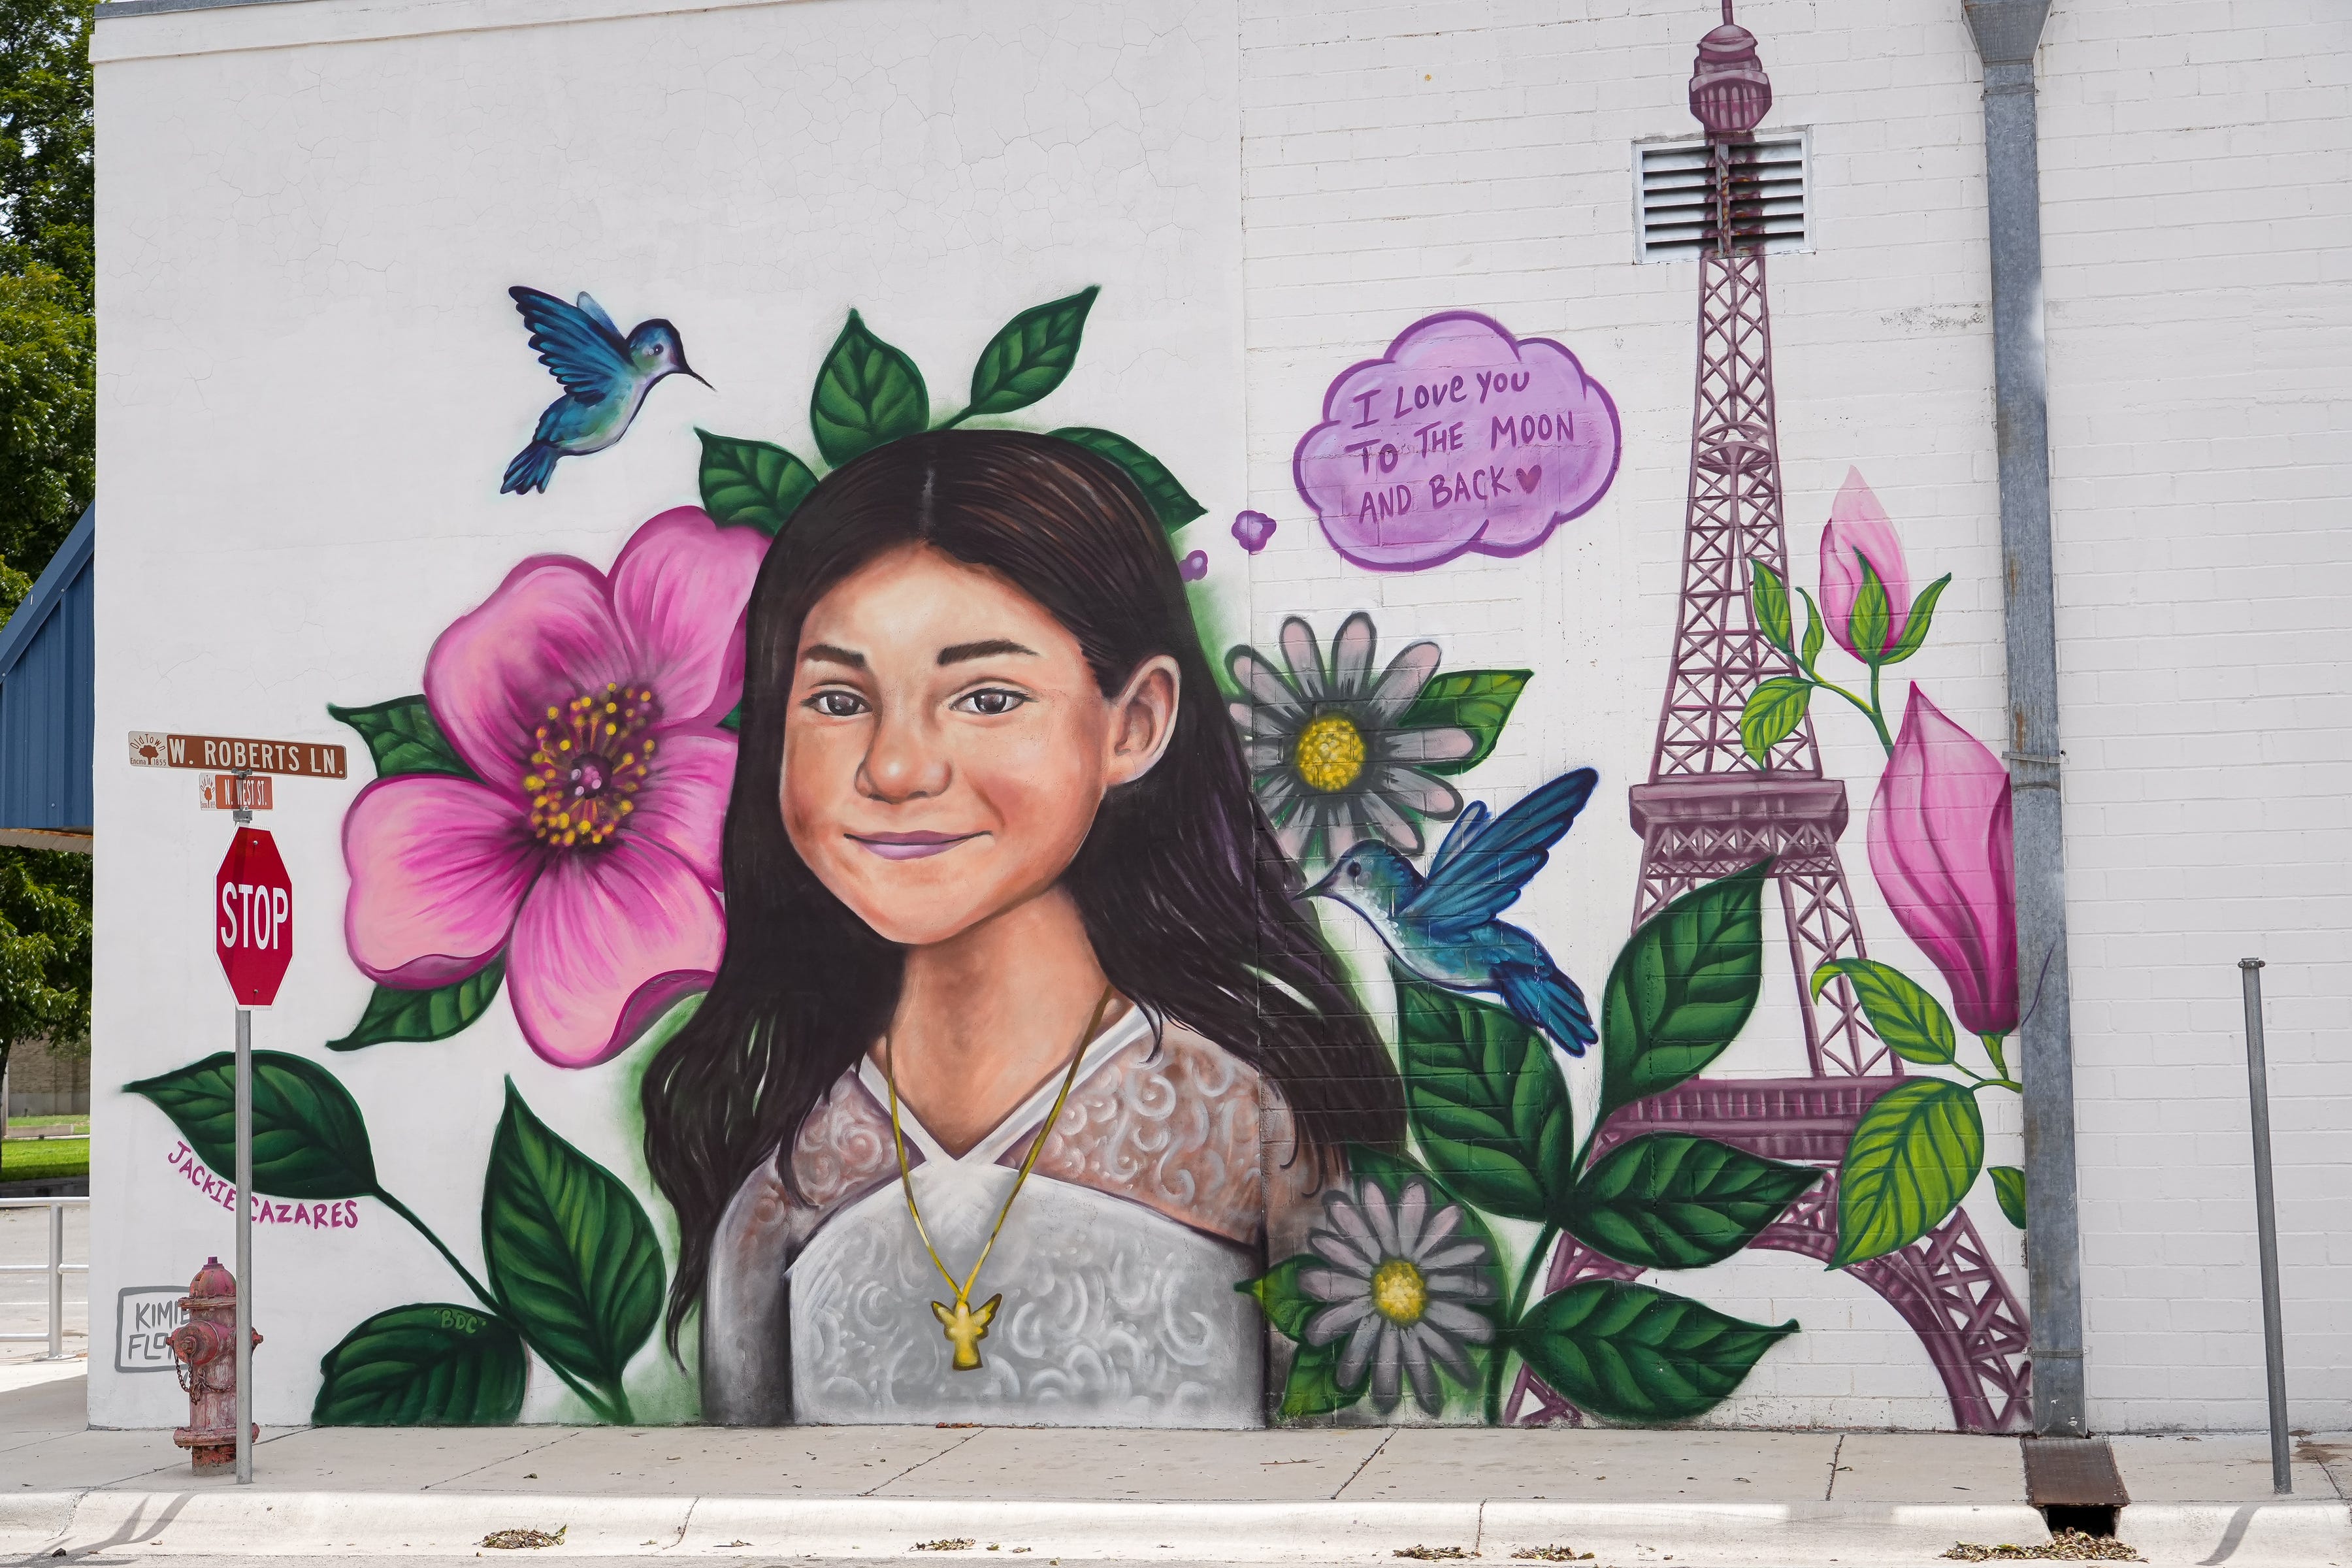 Jackie Cazares and her family always told one another, "I love you to the moon and back." Austin artist Kimmie Flores said she made sure to include that in her mural located on the wall of the Evans Law Office at 127 N. West St. in Uvalde.